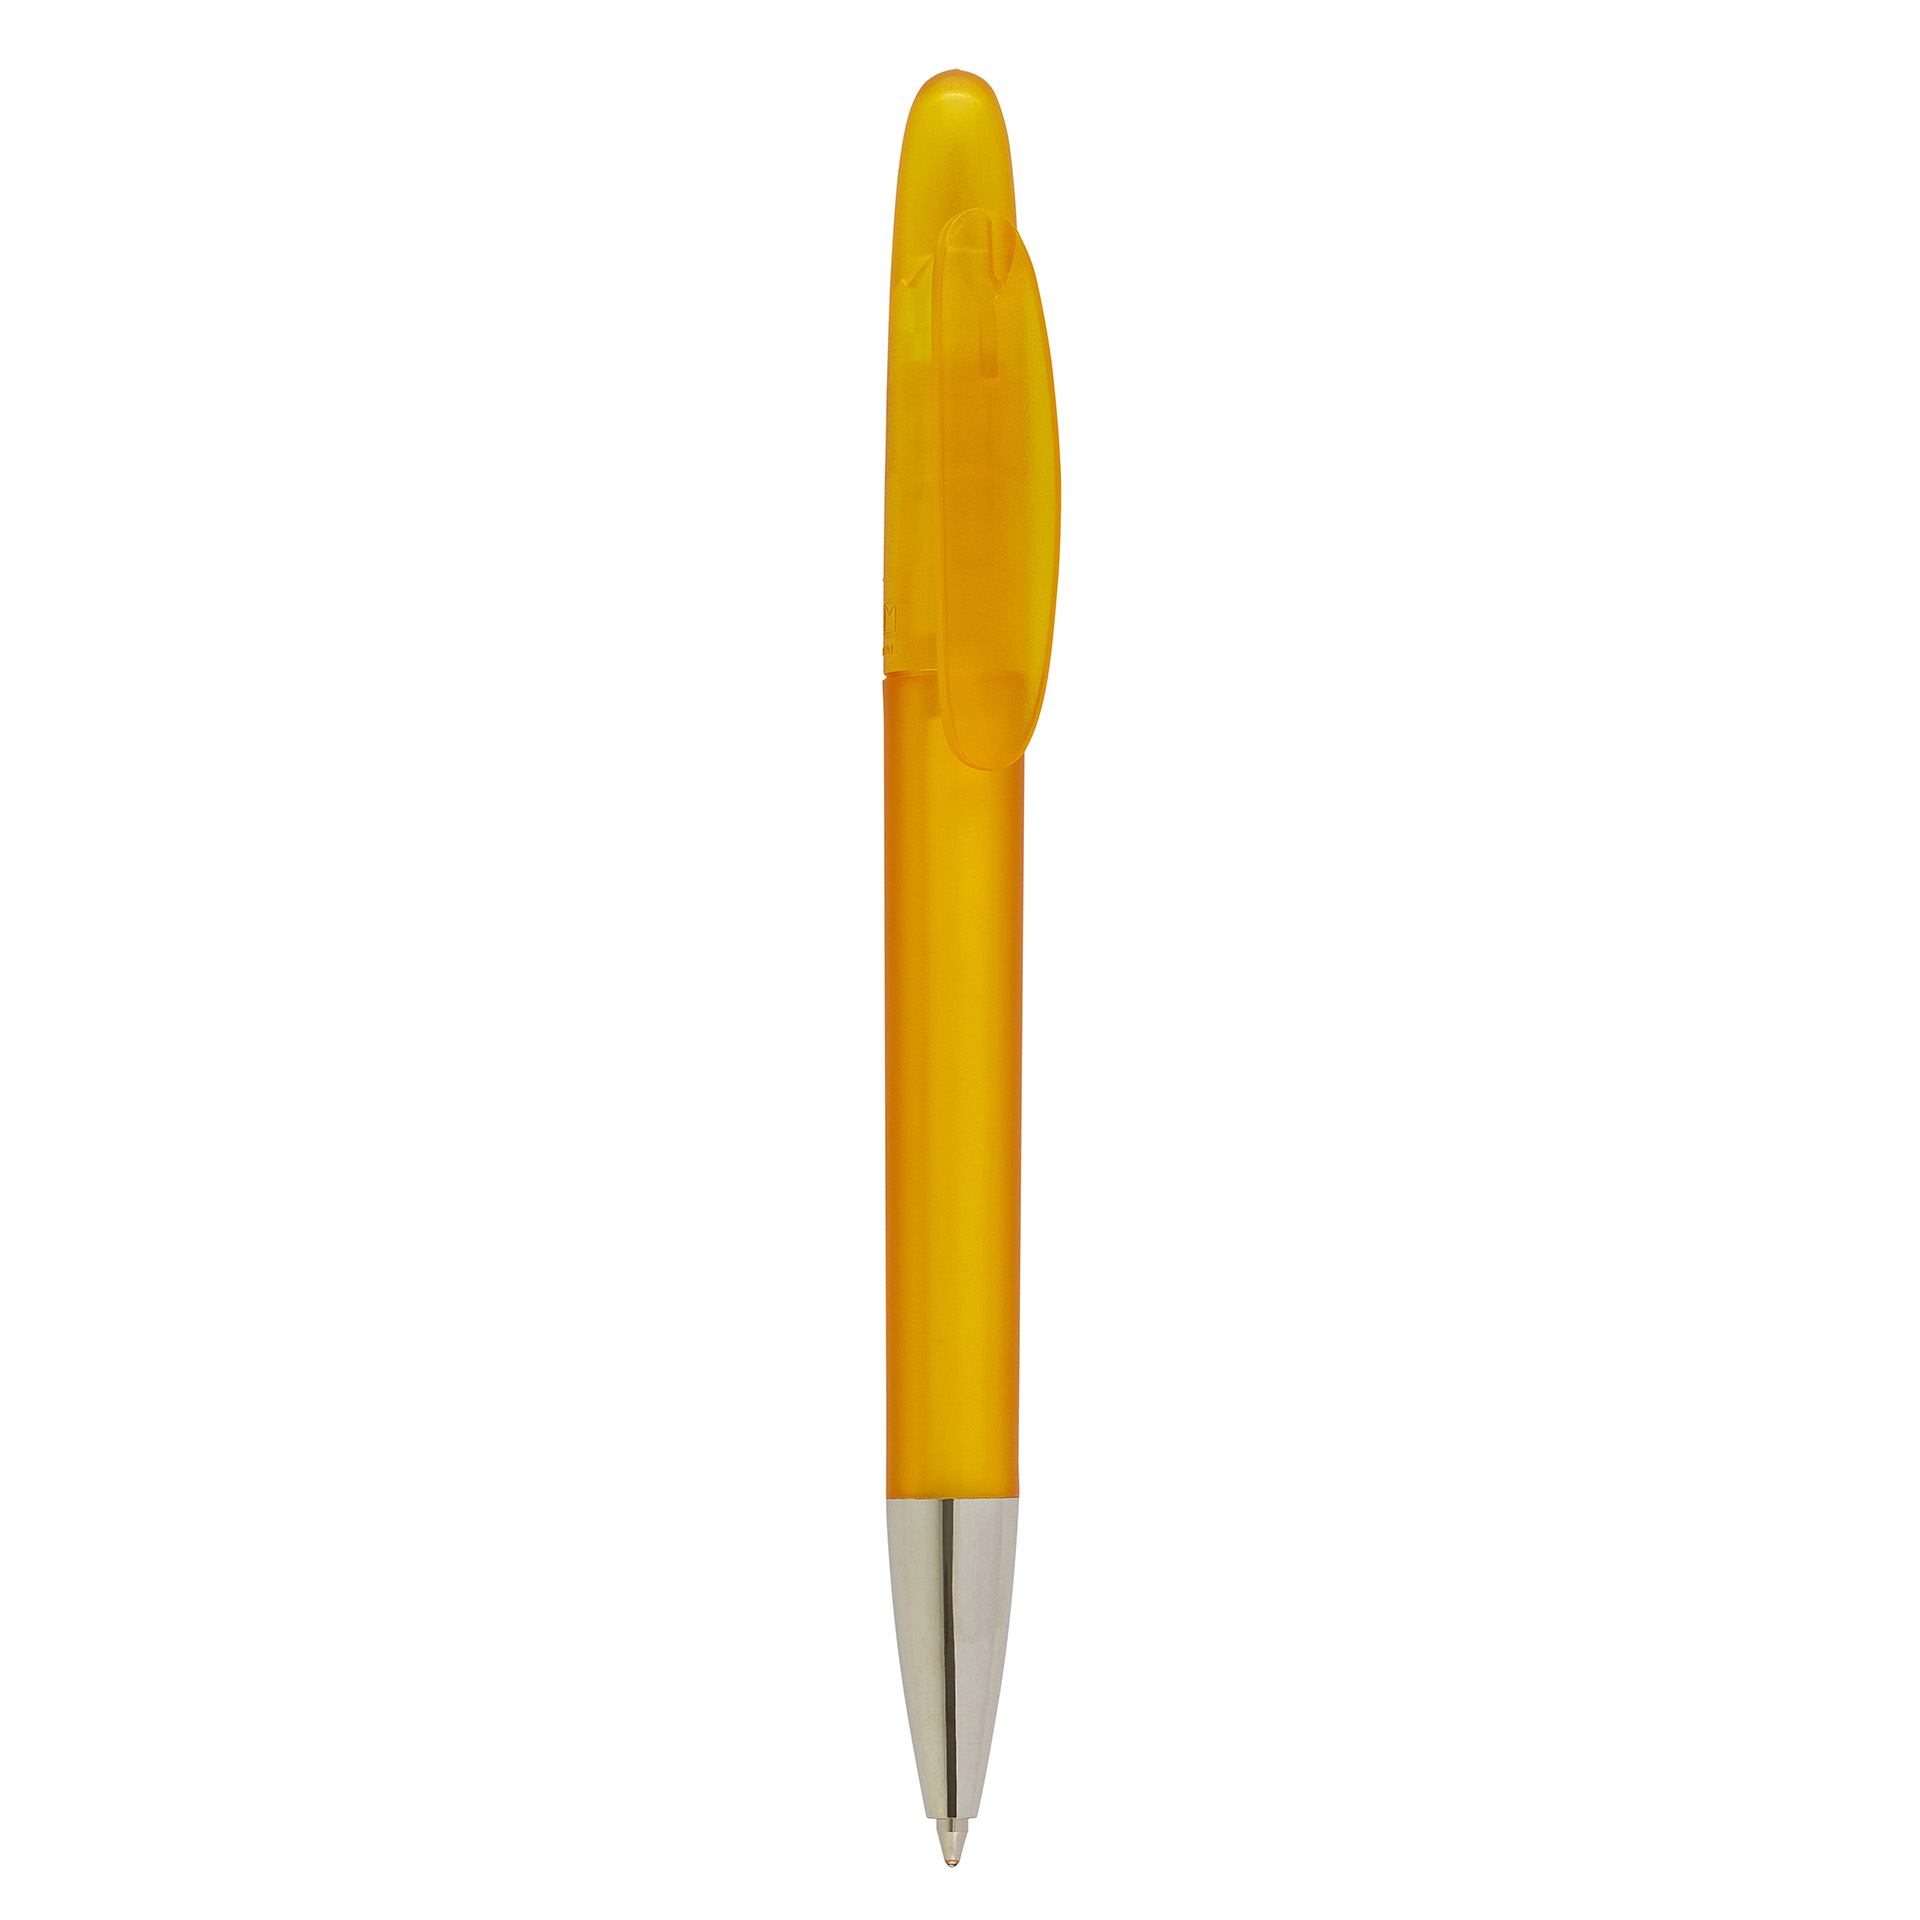 Hudson Biodegradable Frosted Pen  in yellow